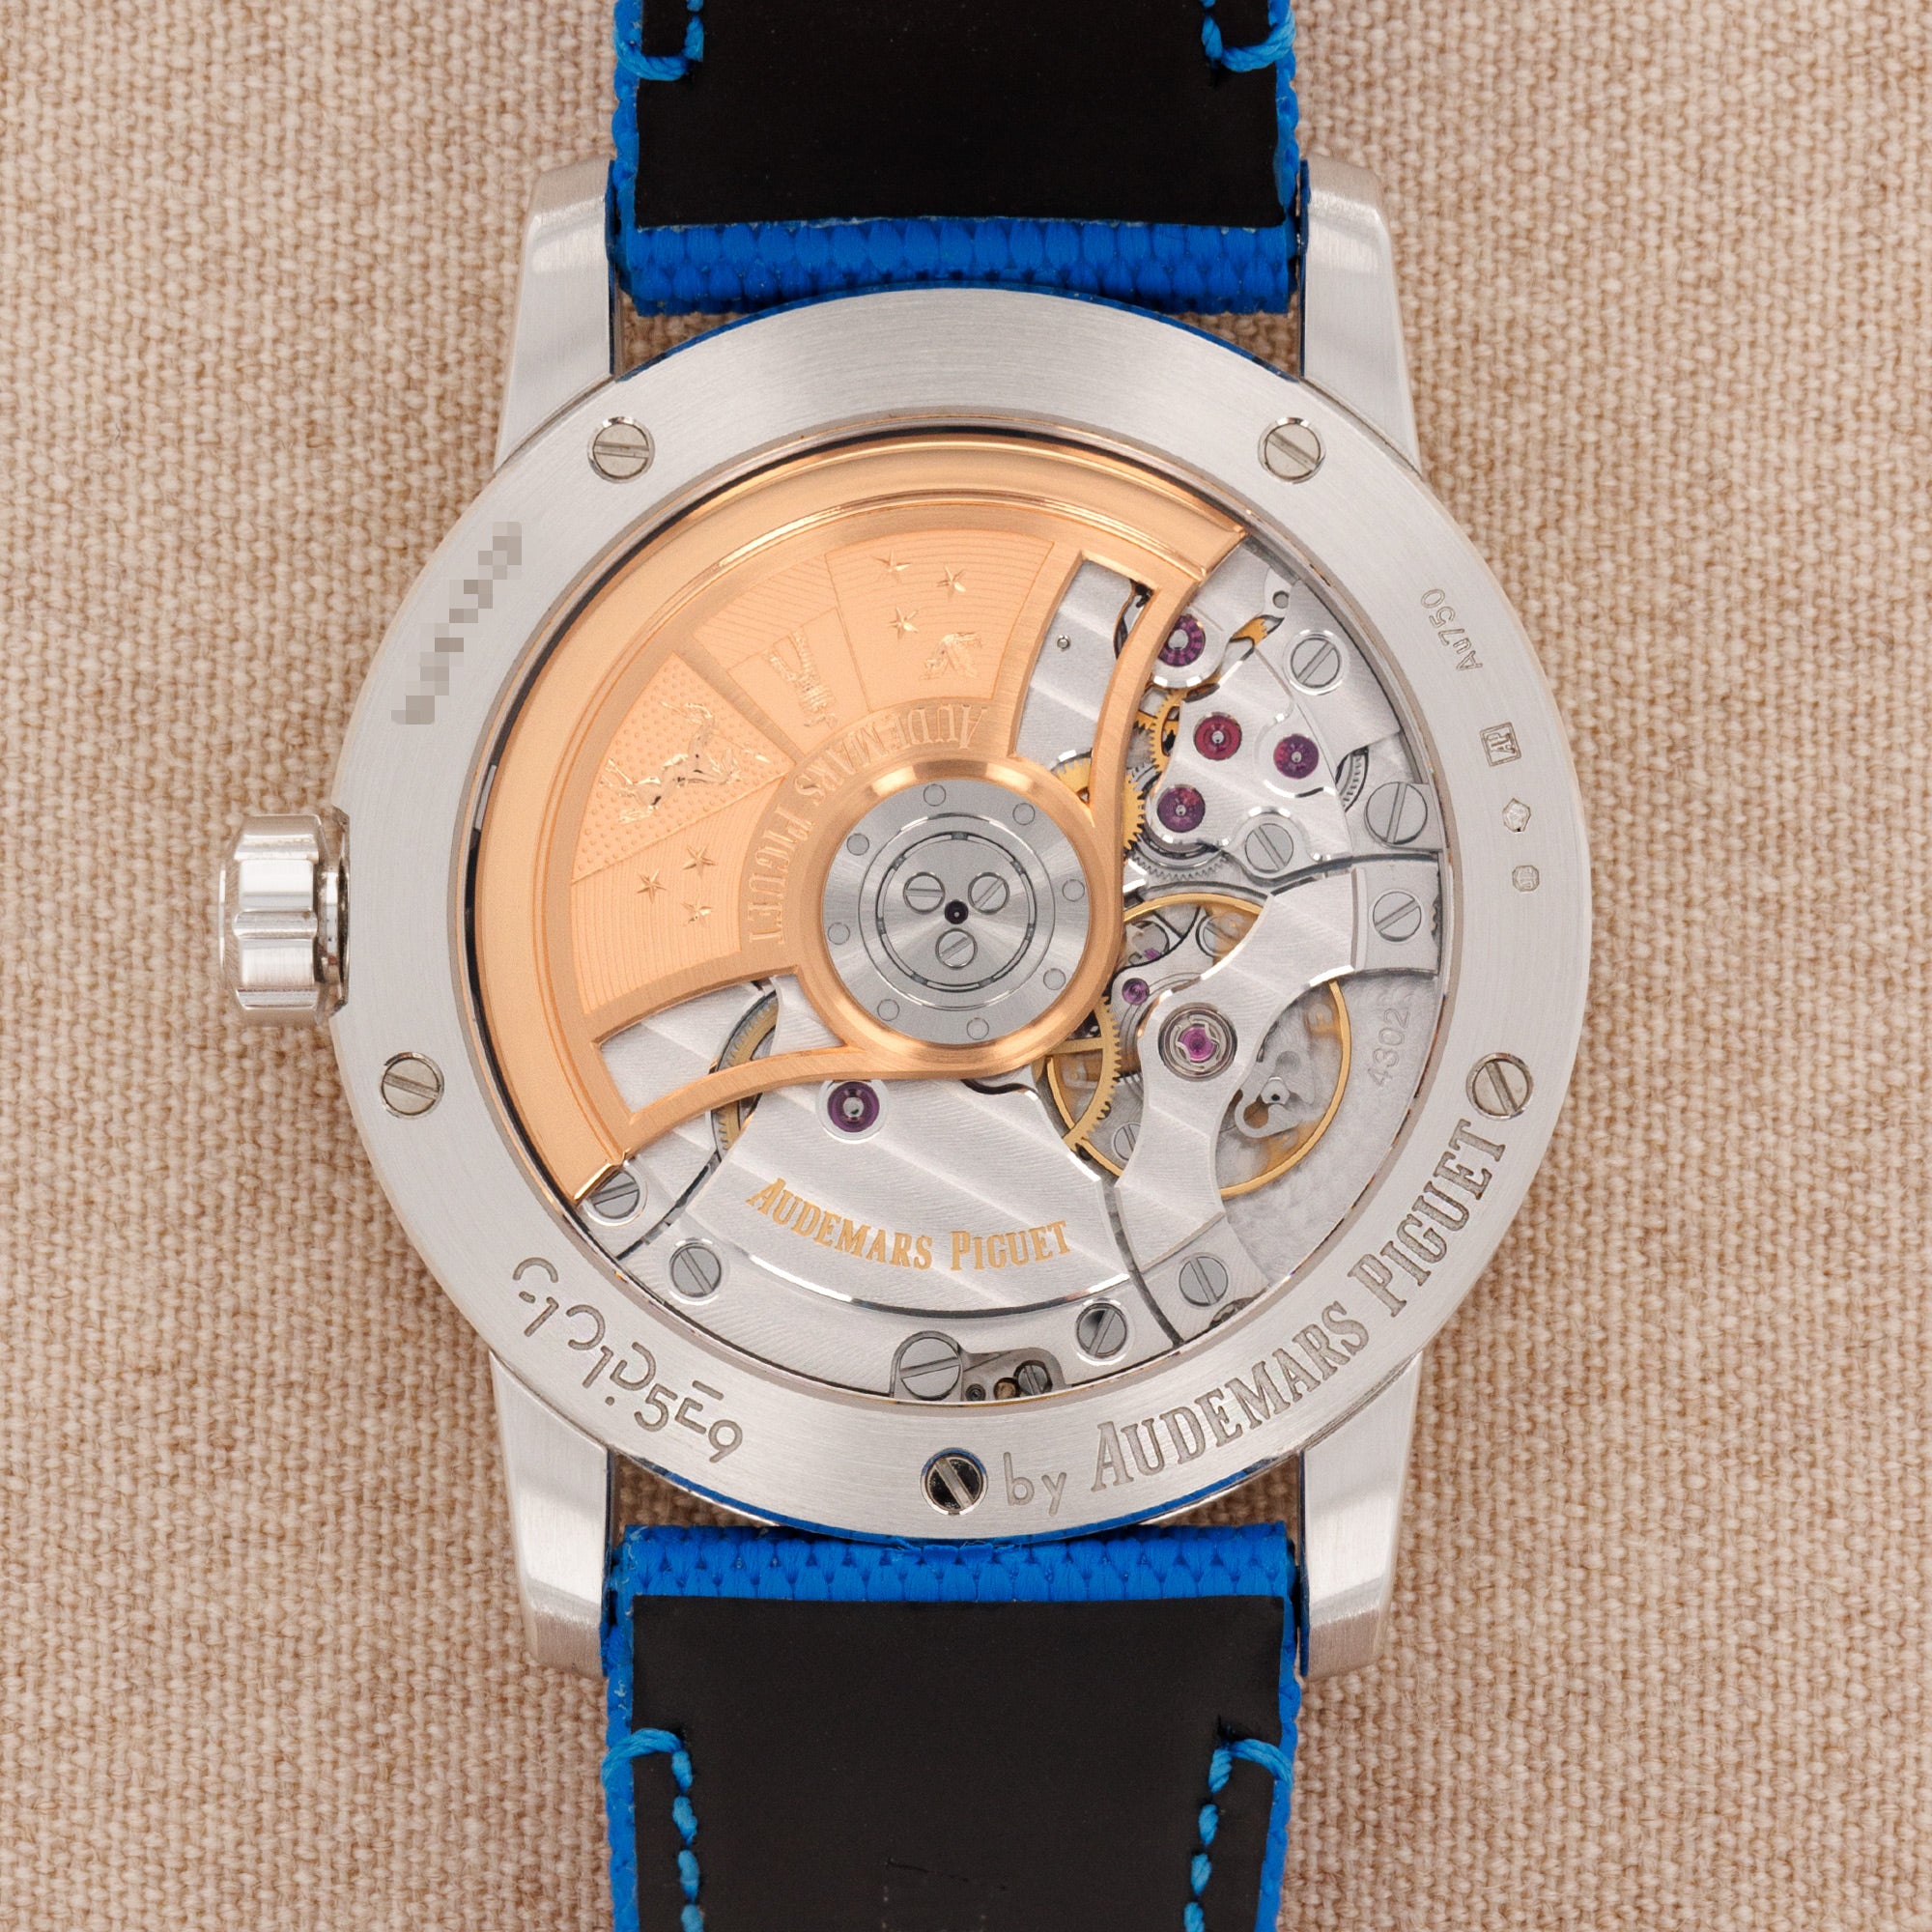 Audemars Piguet White Gold Code 11:59 with Smoked Blue Dial